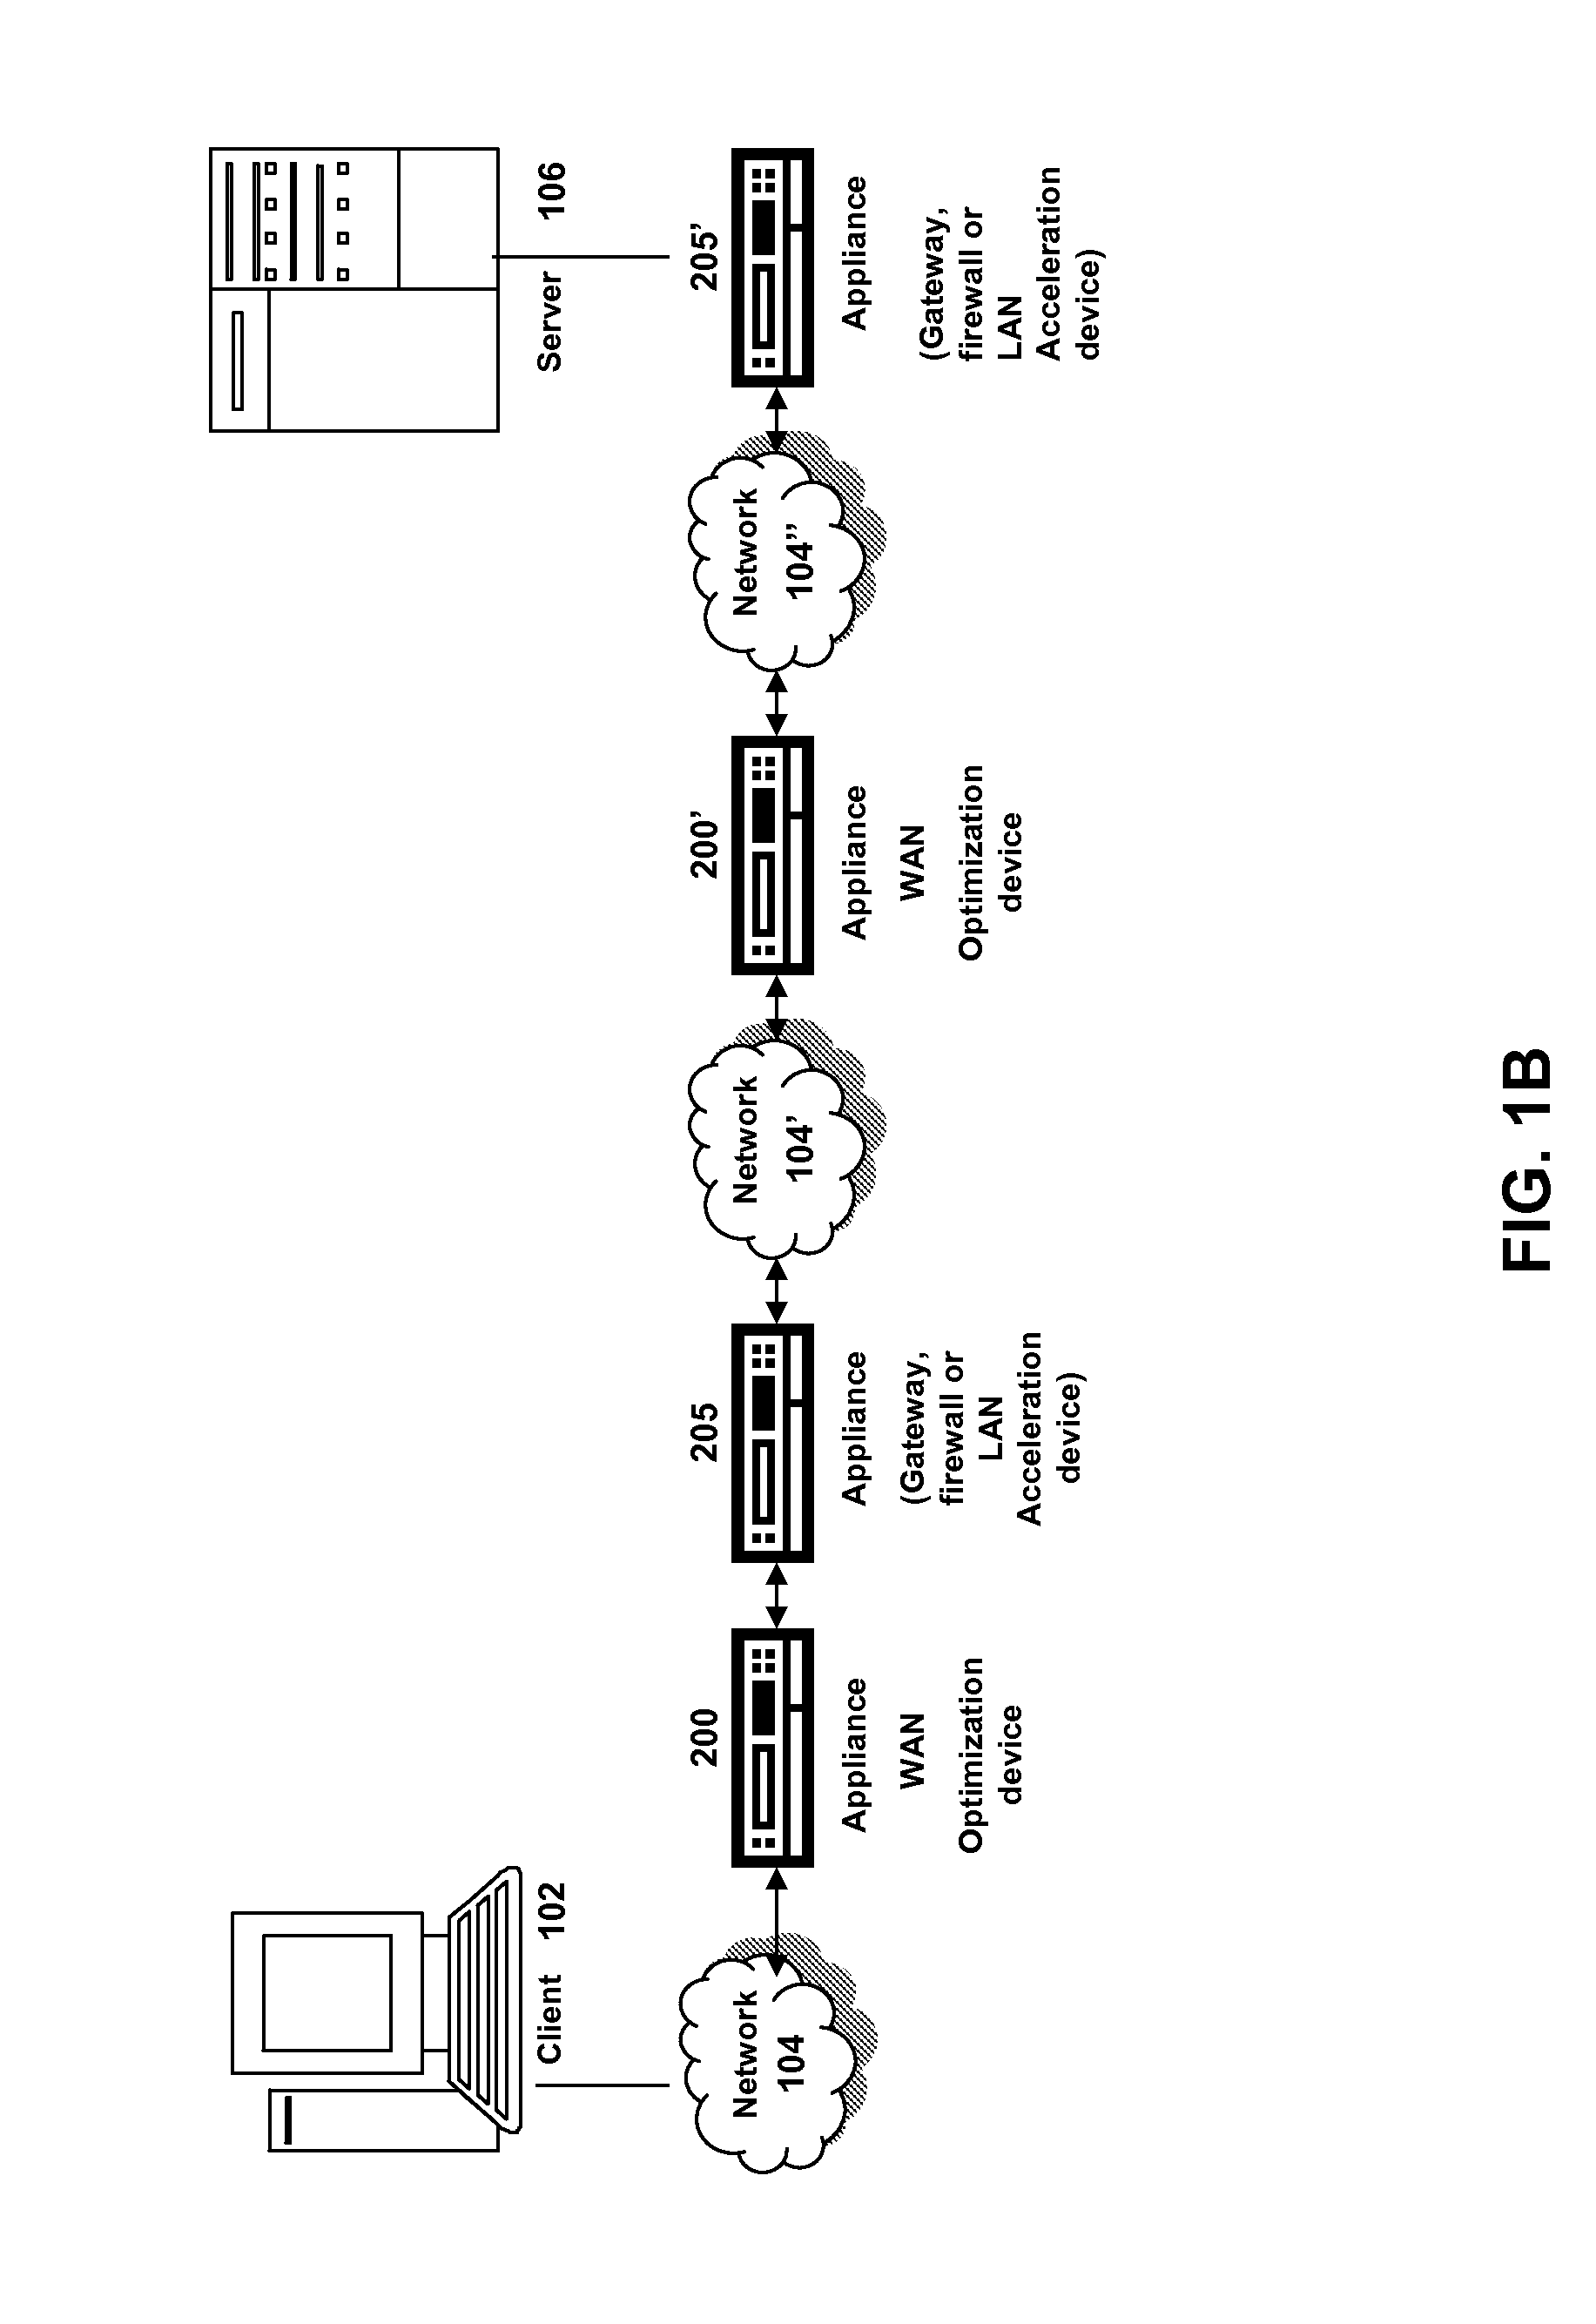 Systems and methods for providing virtual fair queuing of network traffic